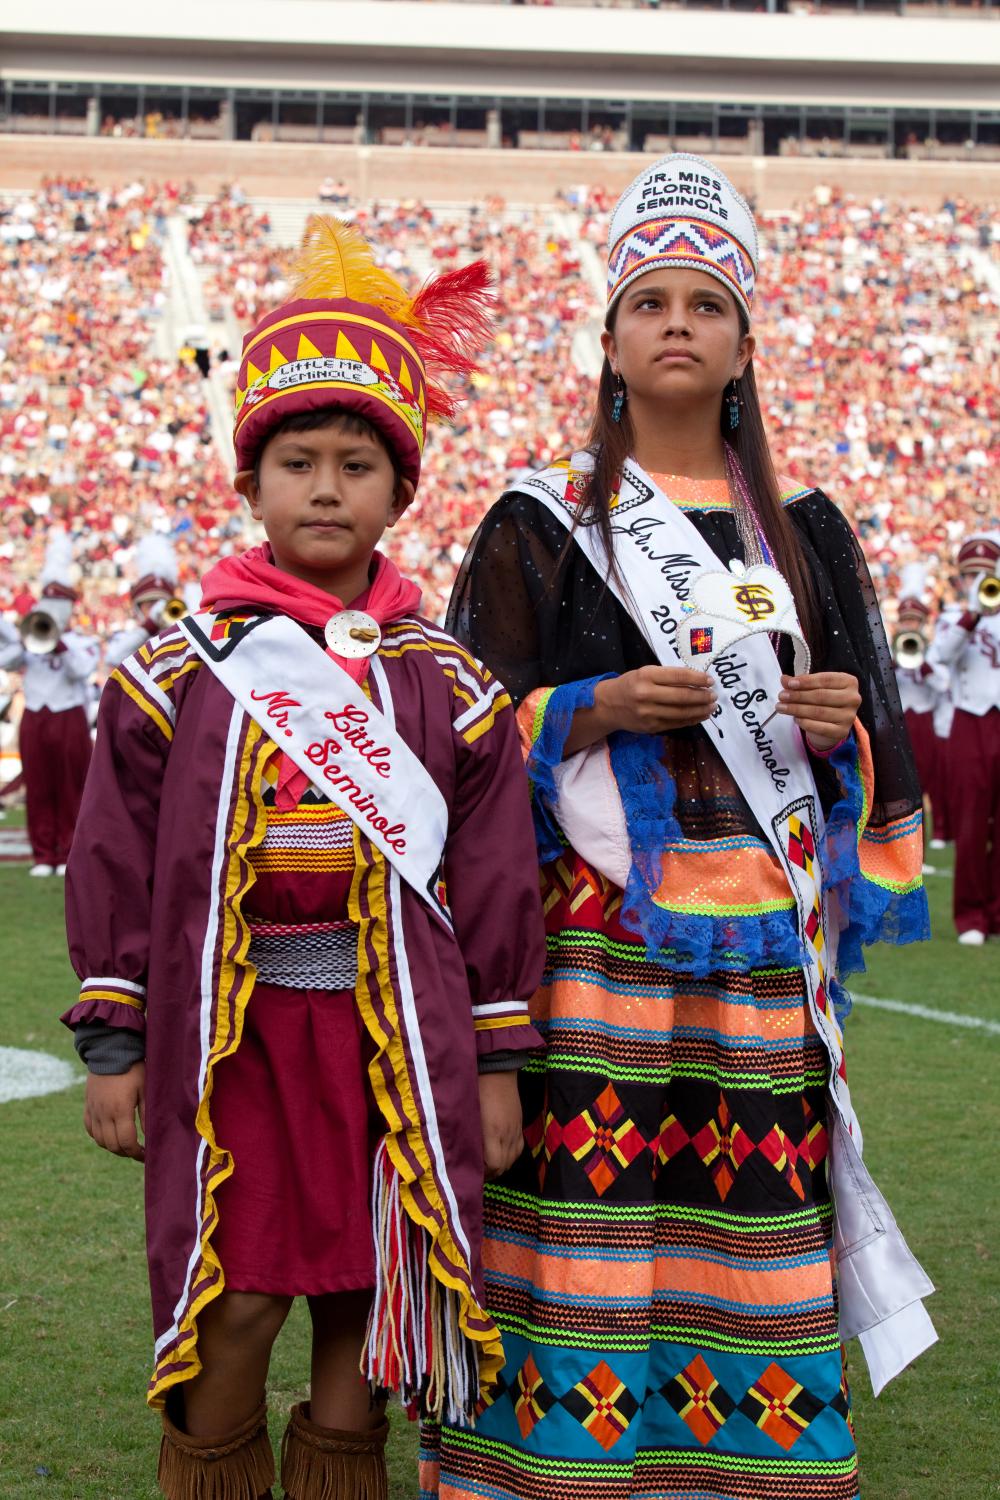 Little Mr. Seminole and Jr. Miss Florida Seminole stand together in the middle of Doak Campbell stadium's field. They are wearing traditional regalia under their pageant sashes.